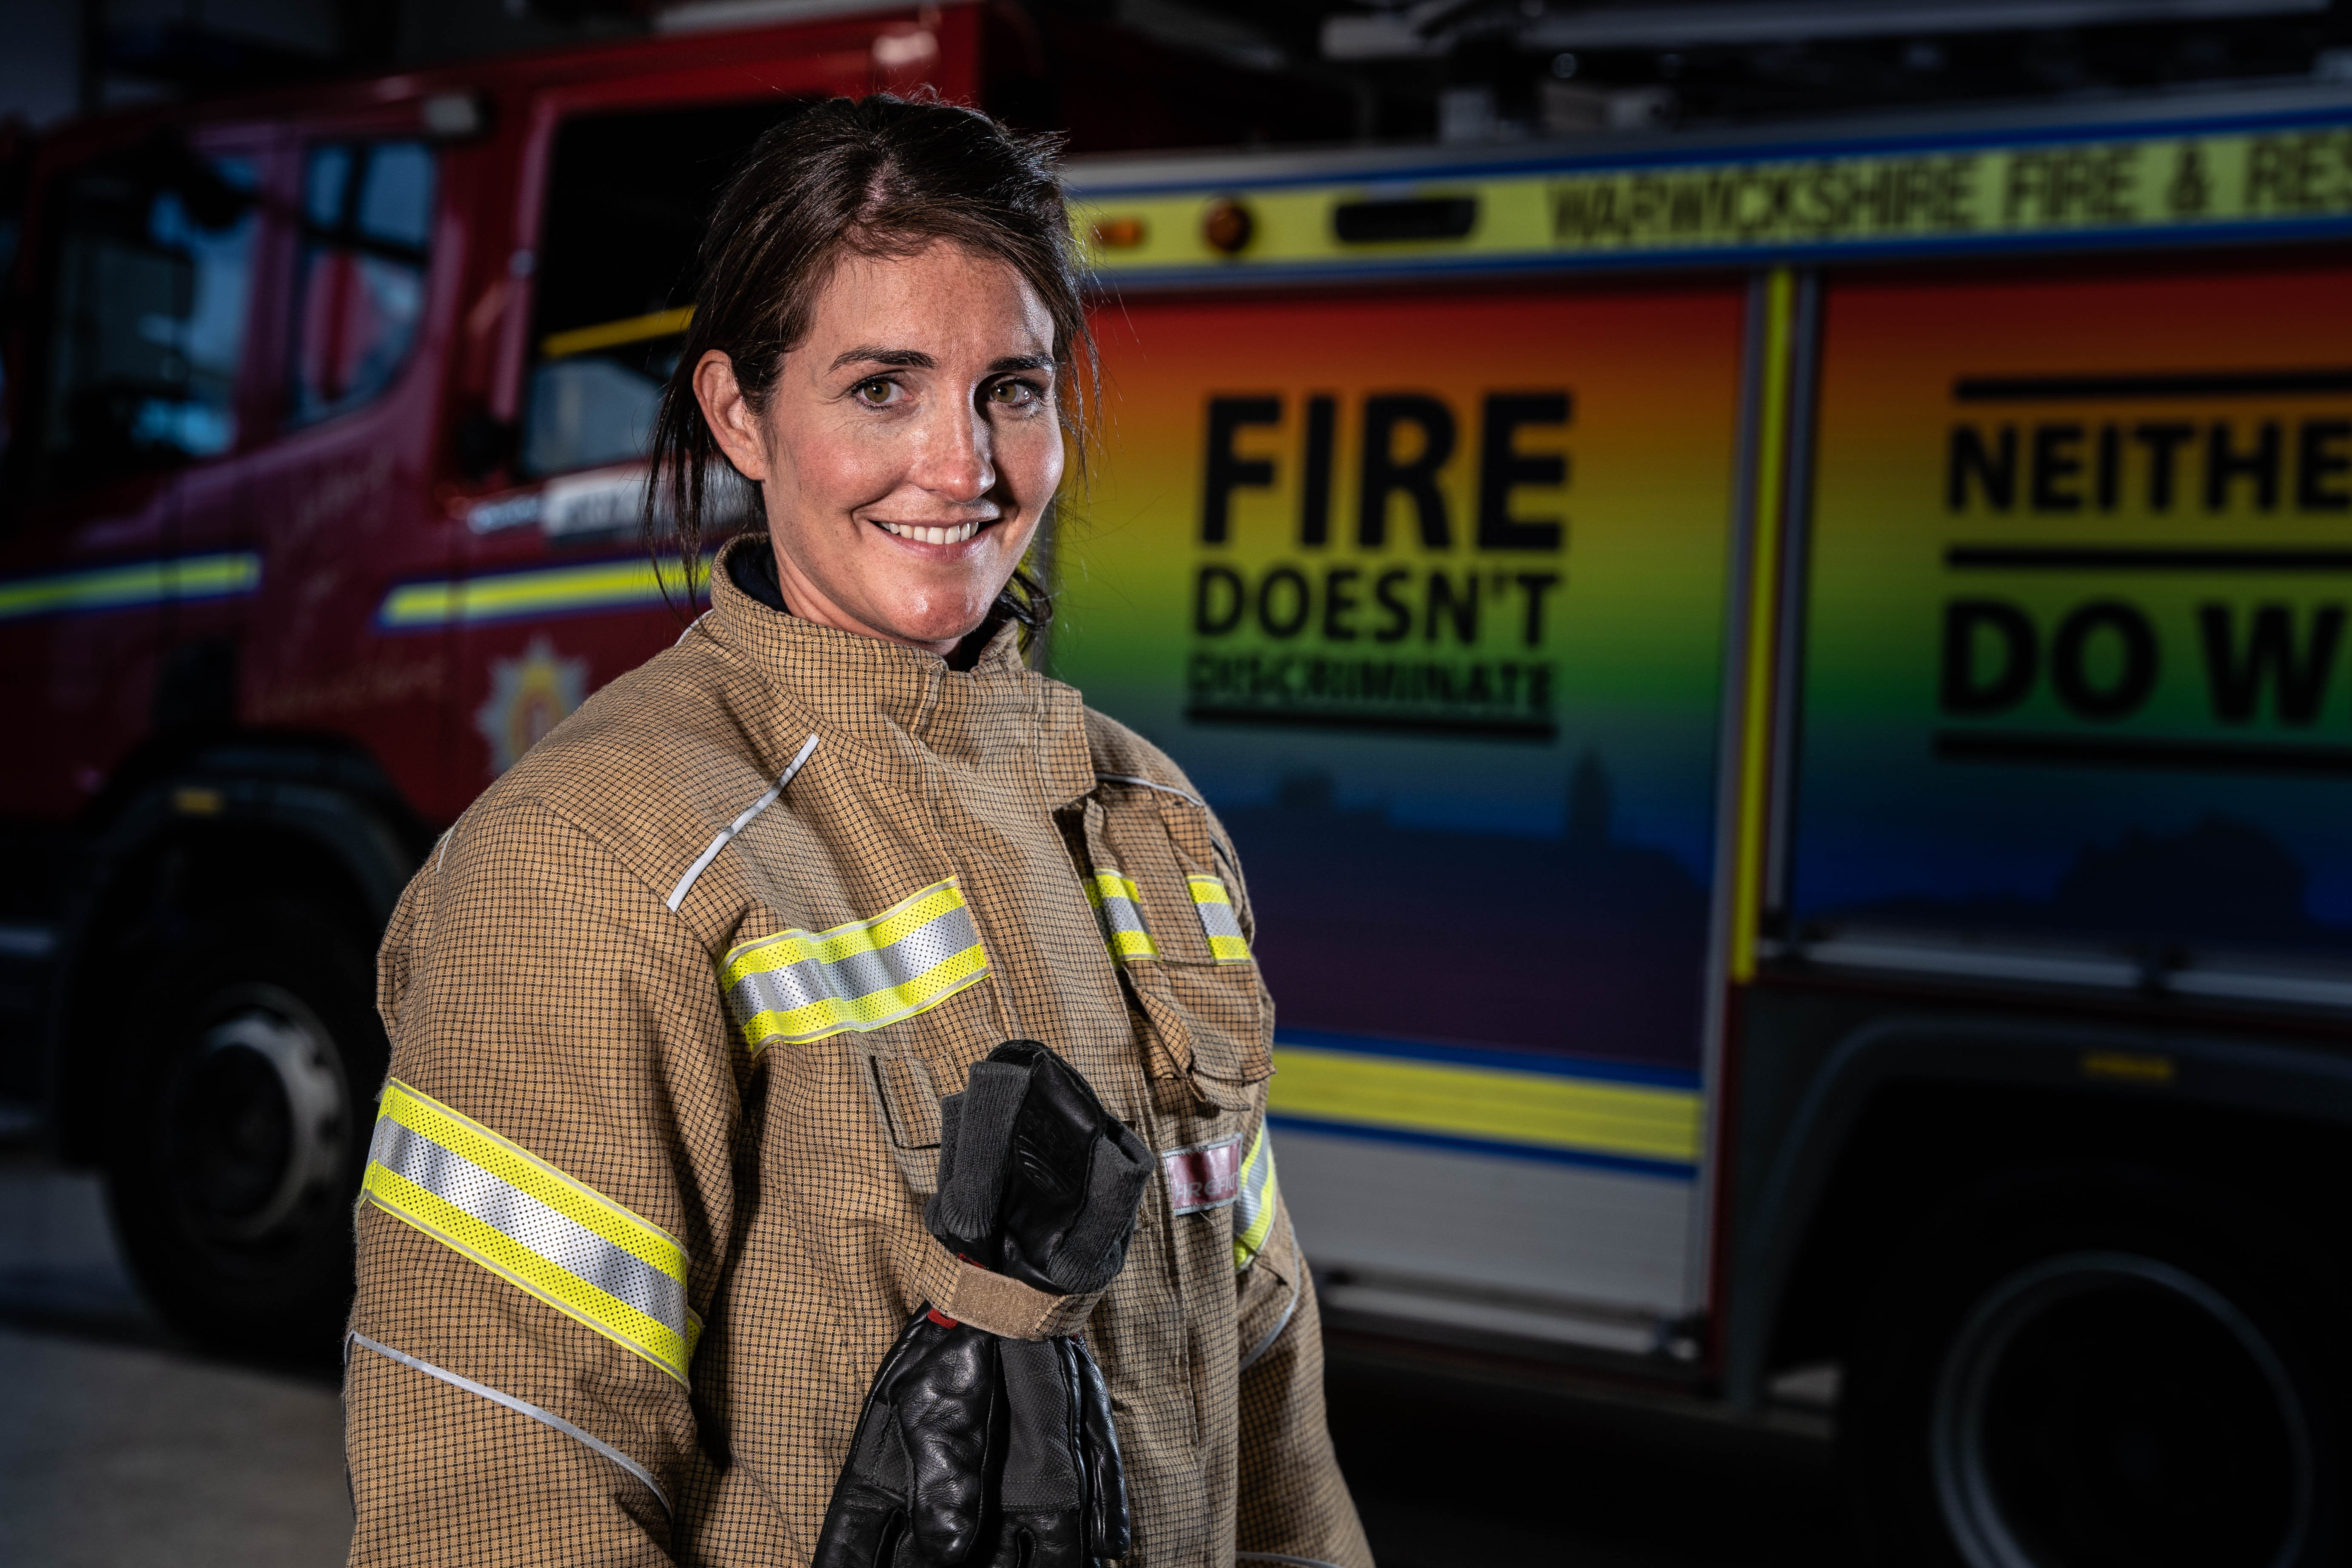 Jade Loomes, On-Call Firefighter at WFRS